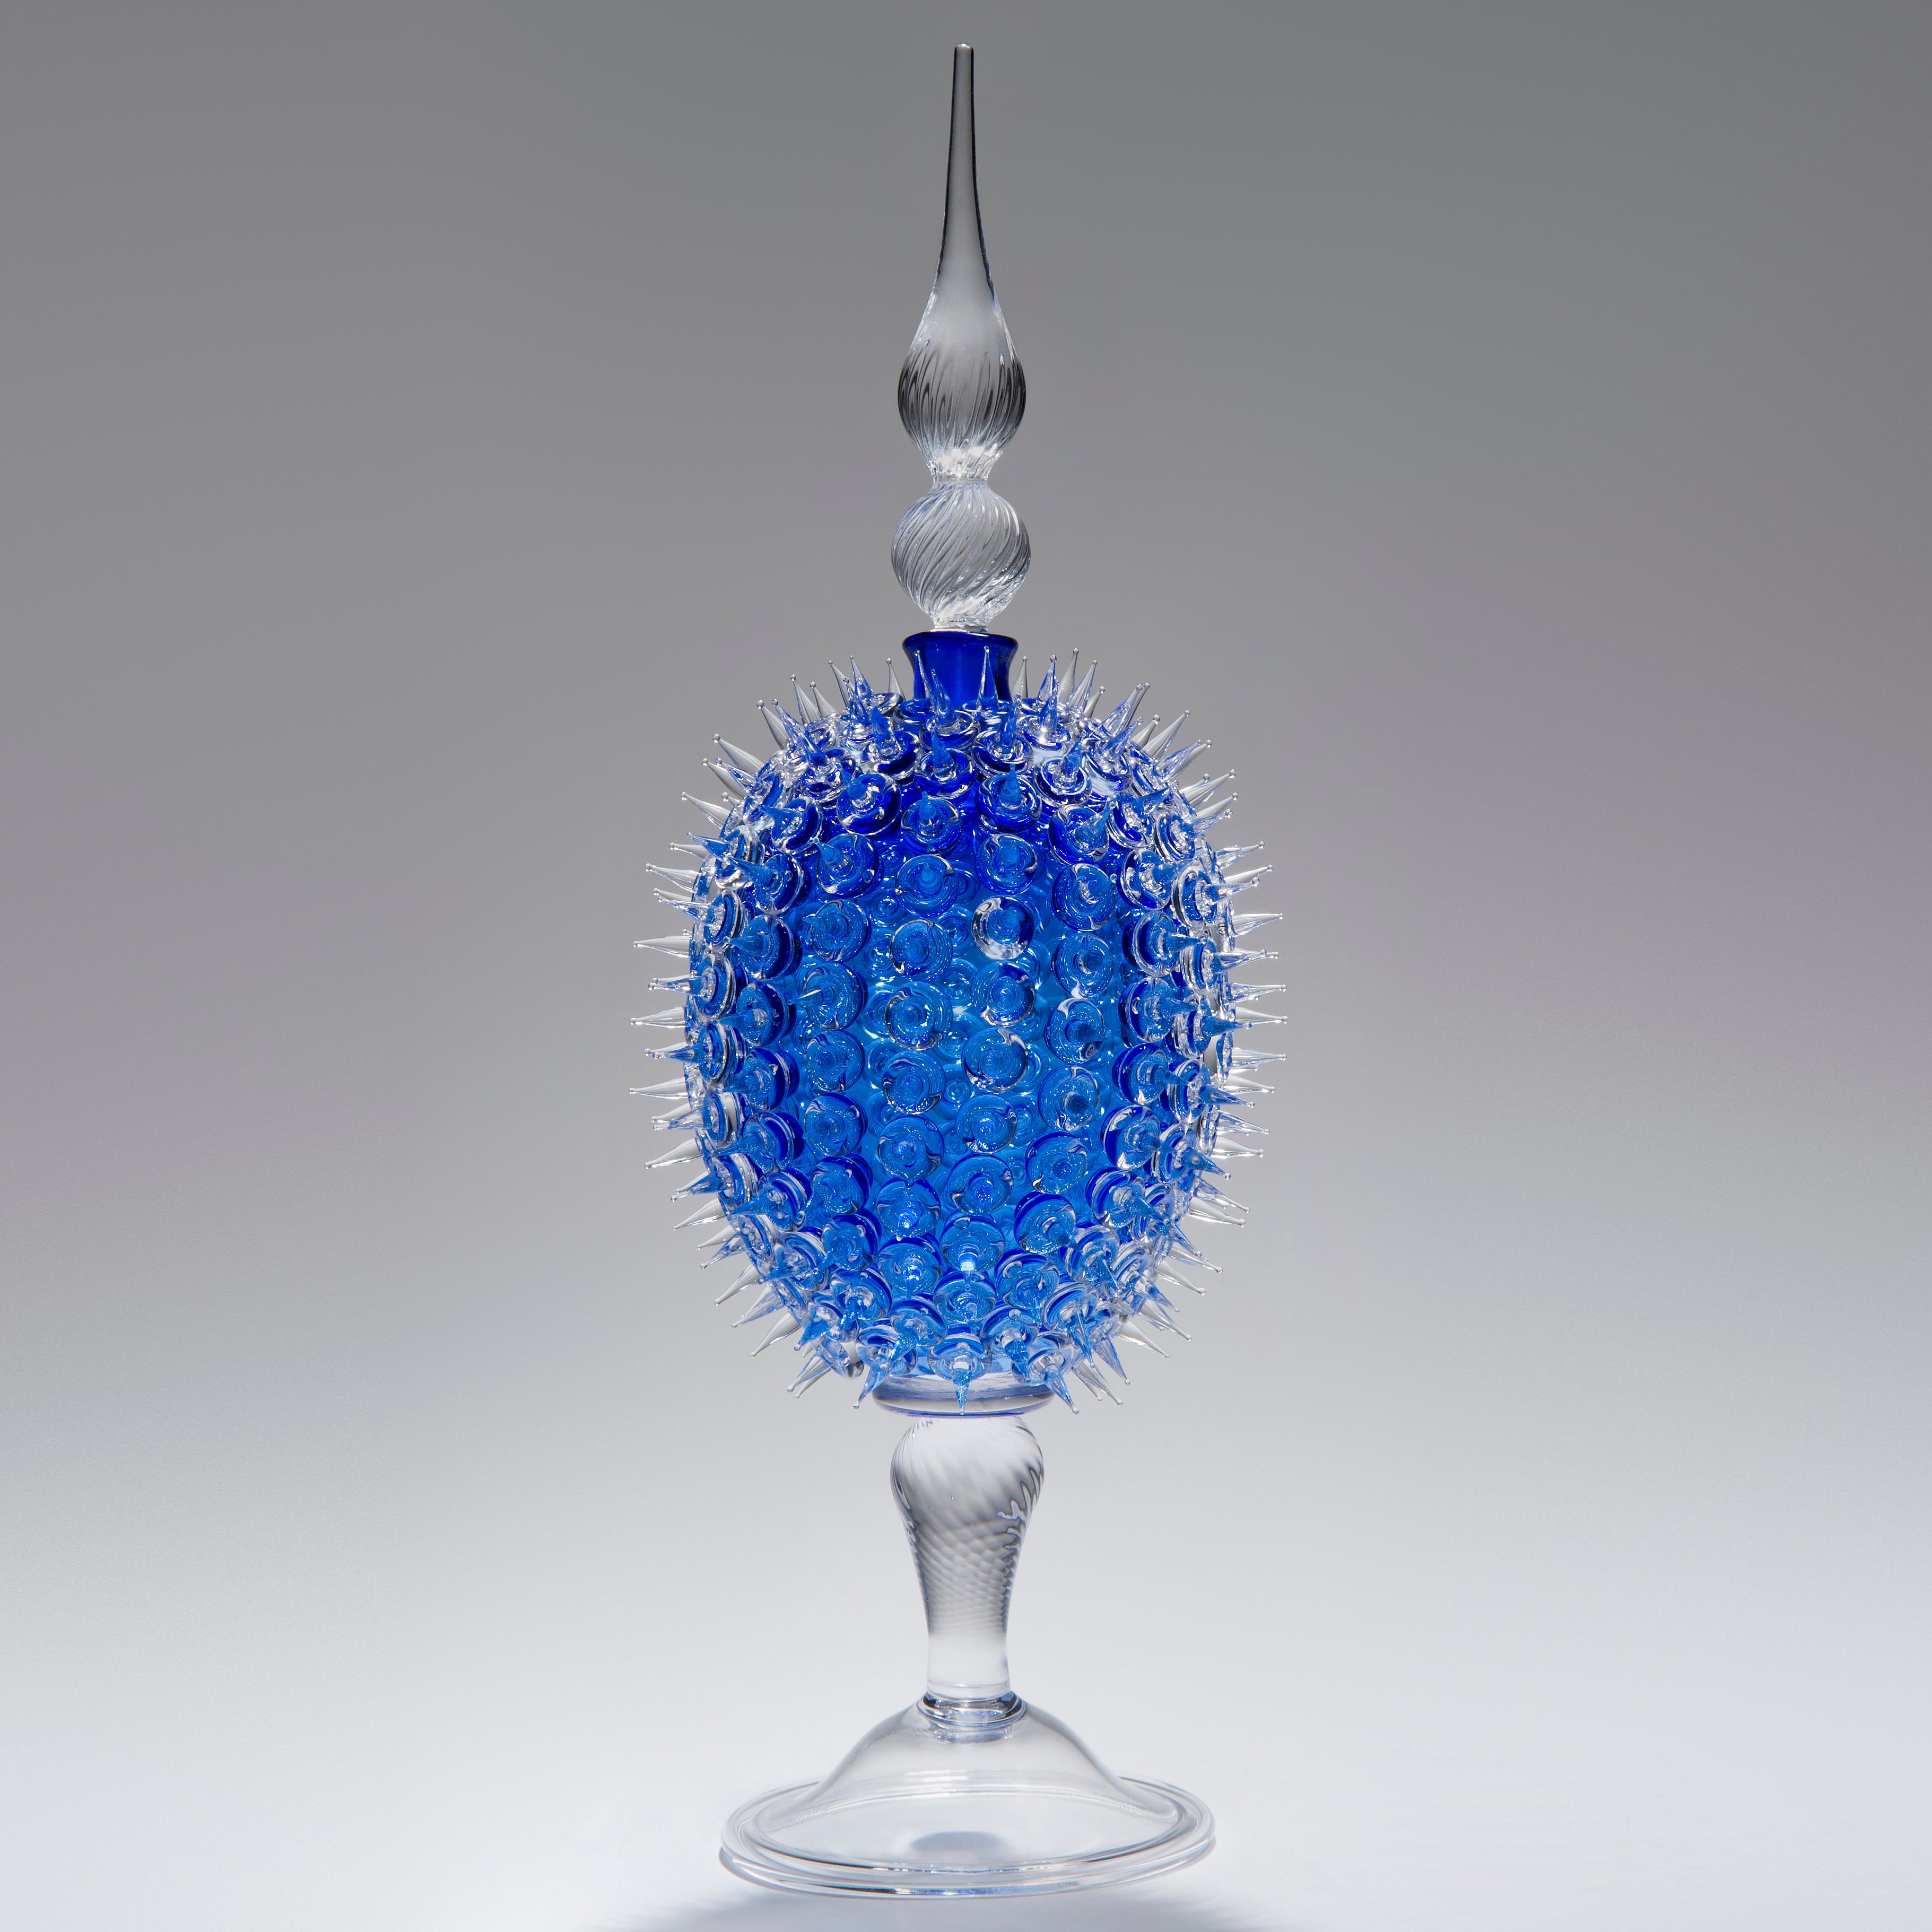 Acanthus Veronese in blue, is a unique art glass jar by British glass artist James Lethbridge. Blown glass with the outer layer covered in flame worked decoration and adornment. With removable decorative glass stopper.

Initially following a